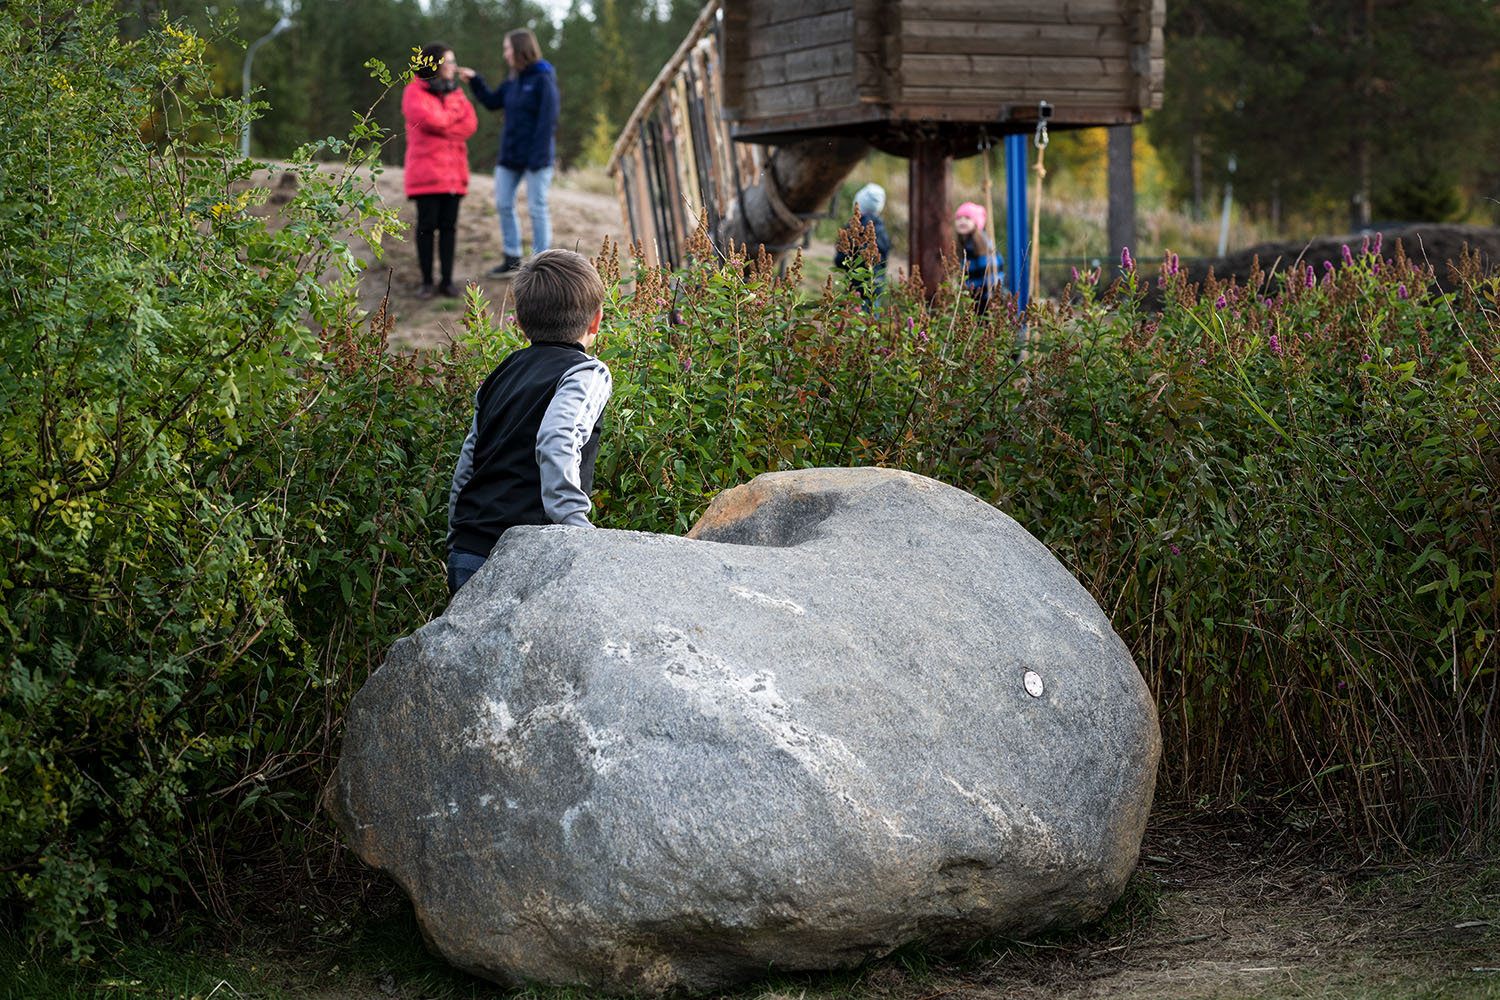 Small boy on a stone in front of a kindergarten.